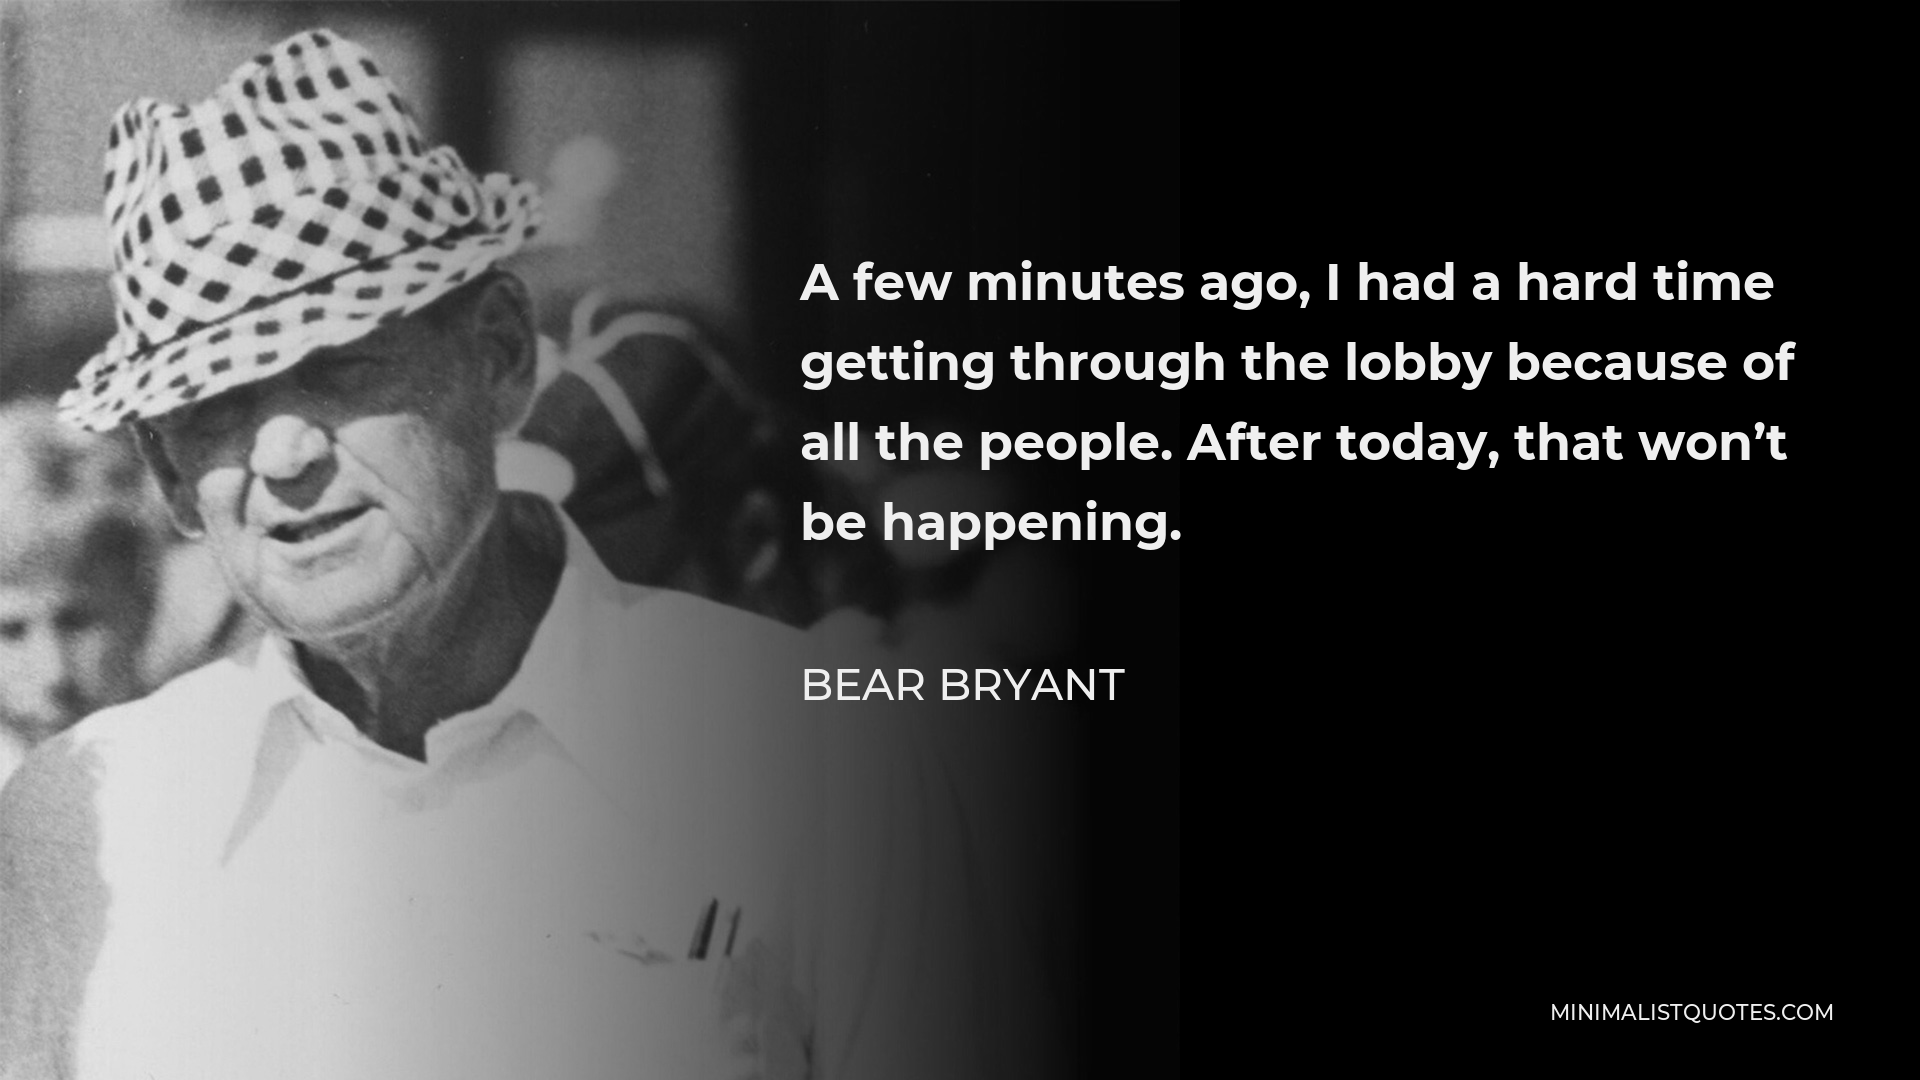 Bear Bryant Quote - A few minutes ago, I had a hard time getting through the lobby because of all the people. After today, that won’t be happening.